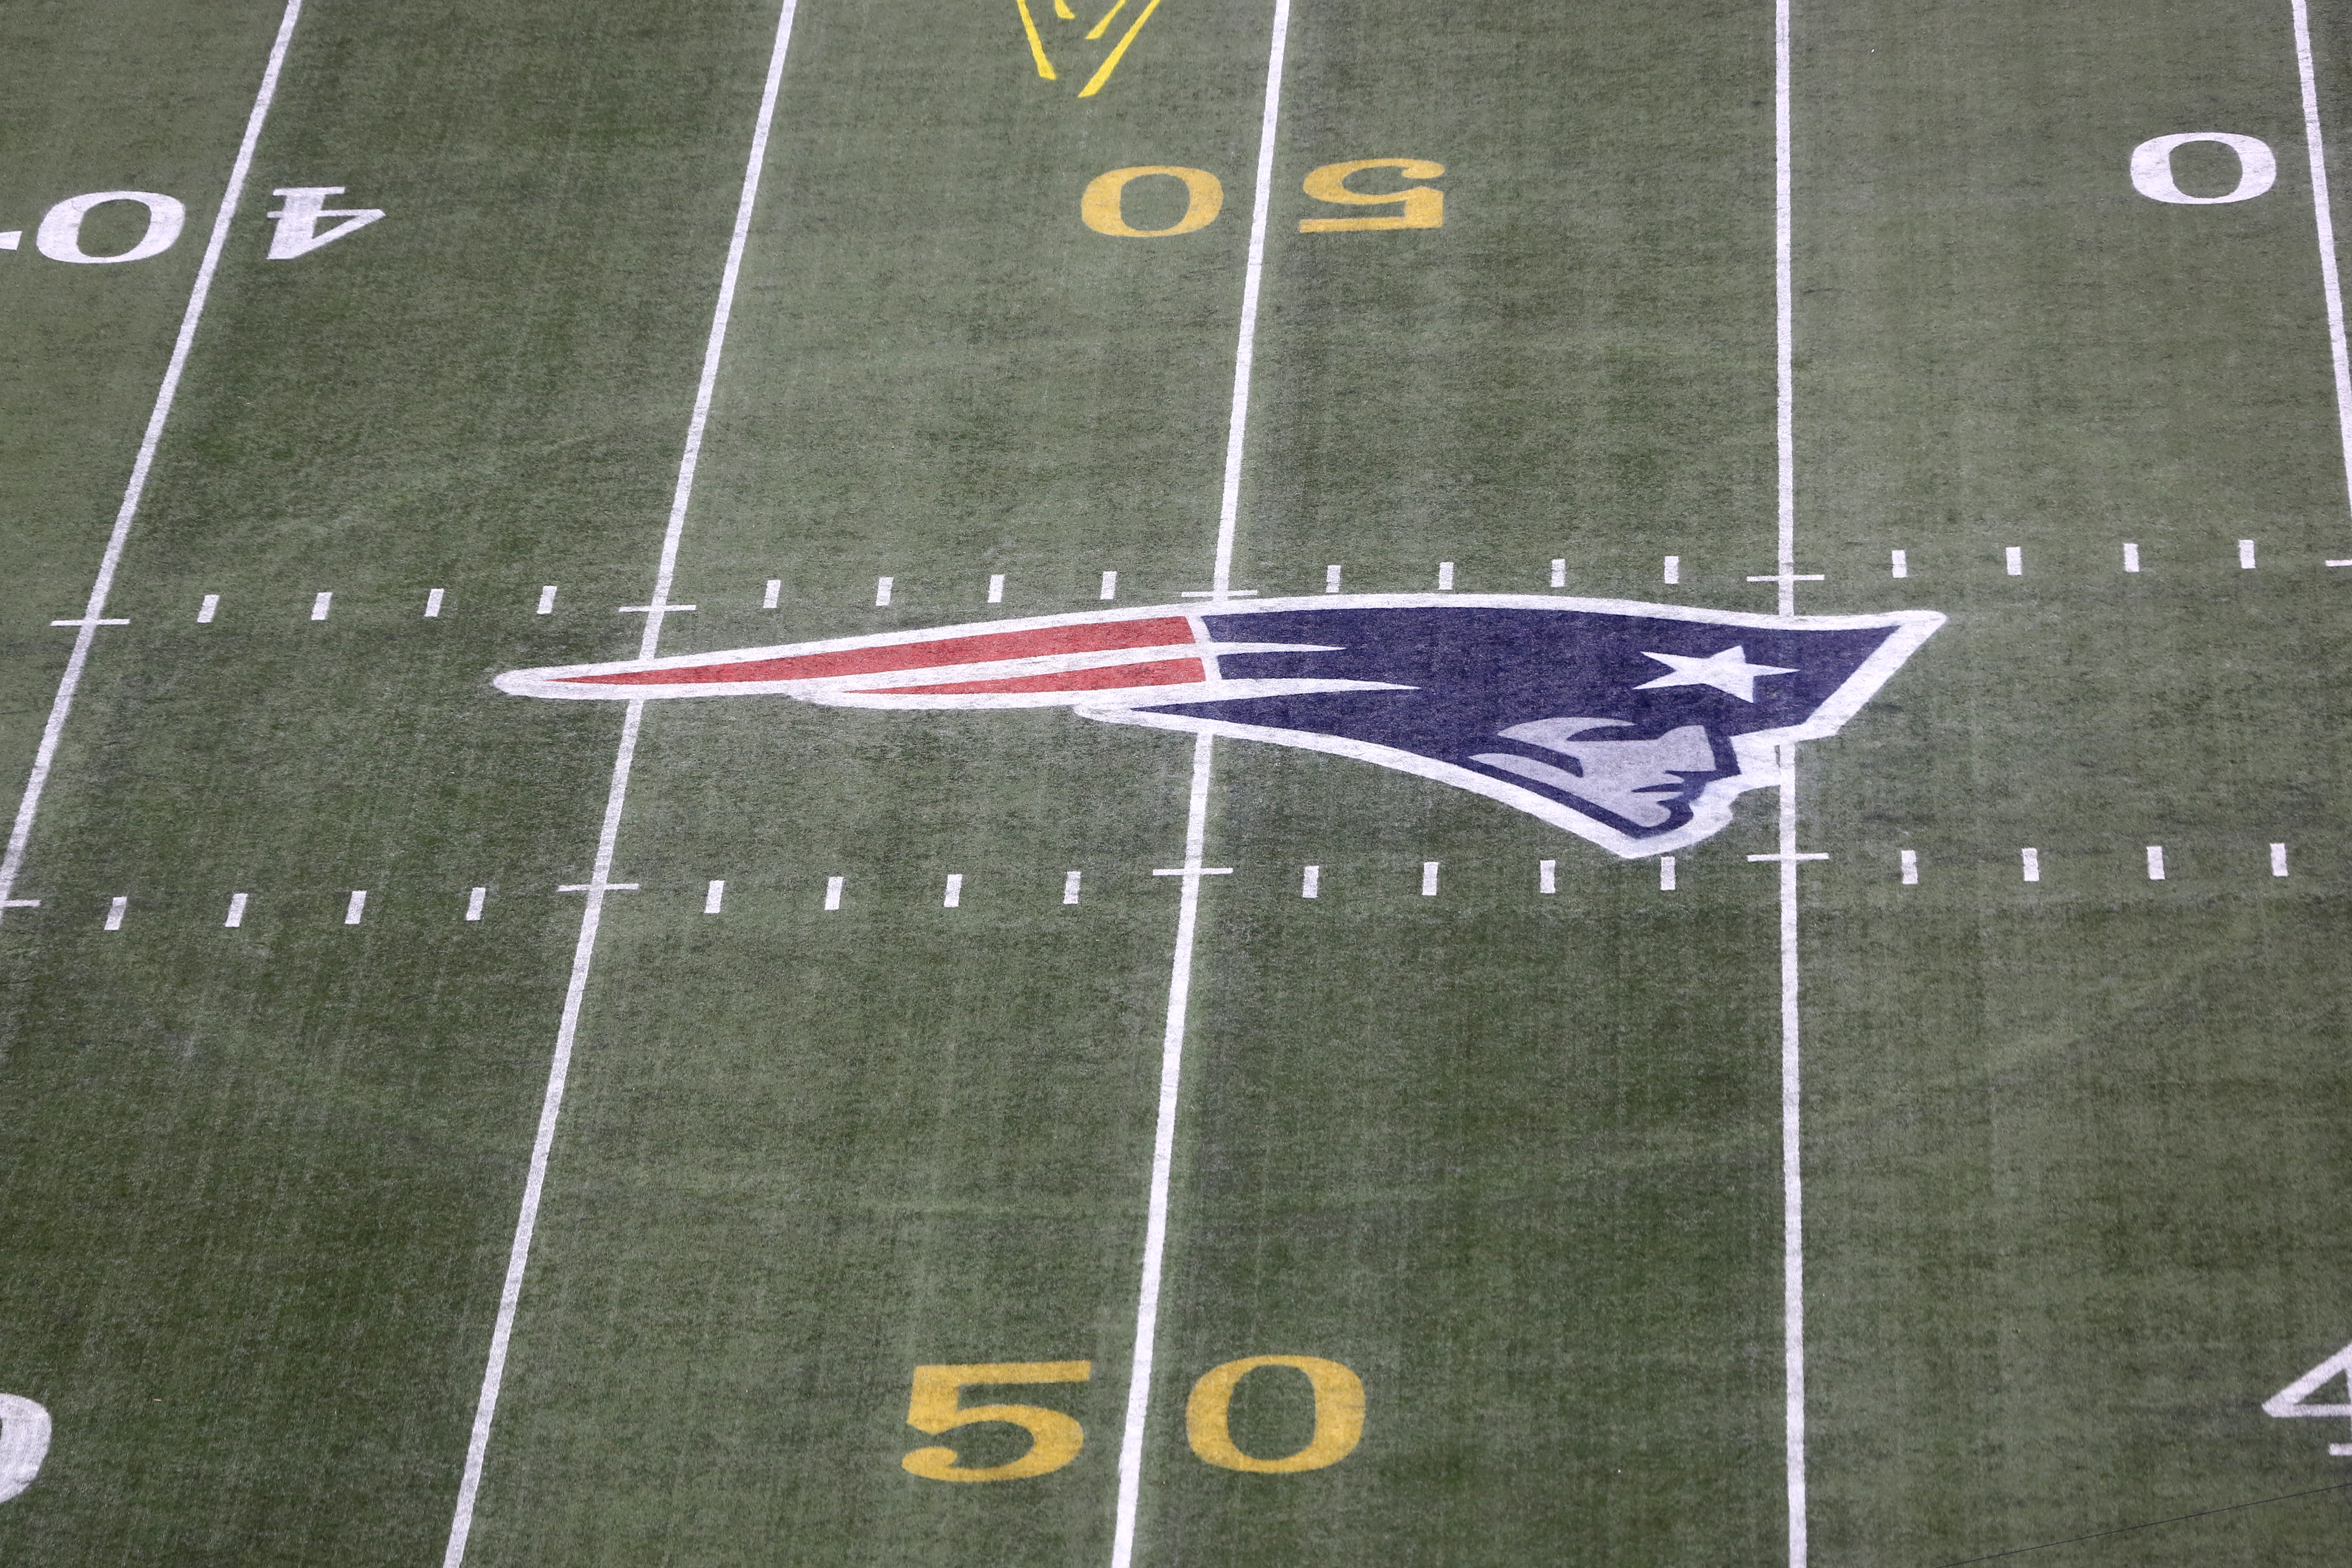 Pats fined $1.1M, lose pick for filming game last season